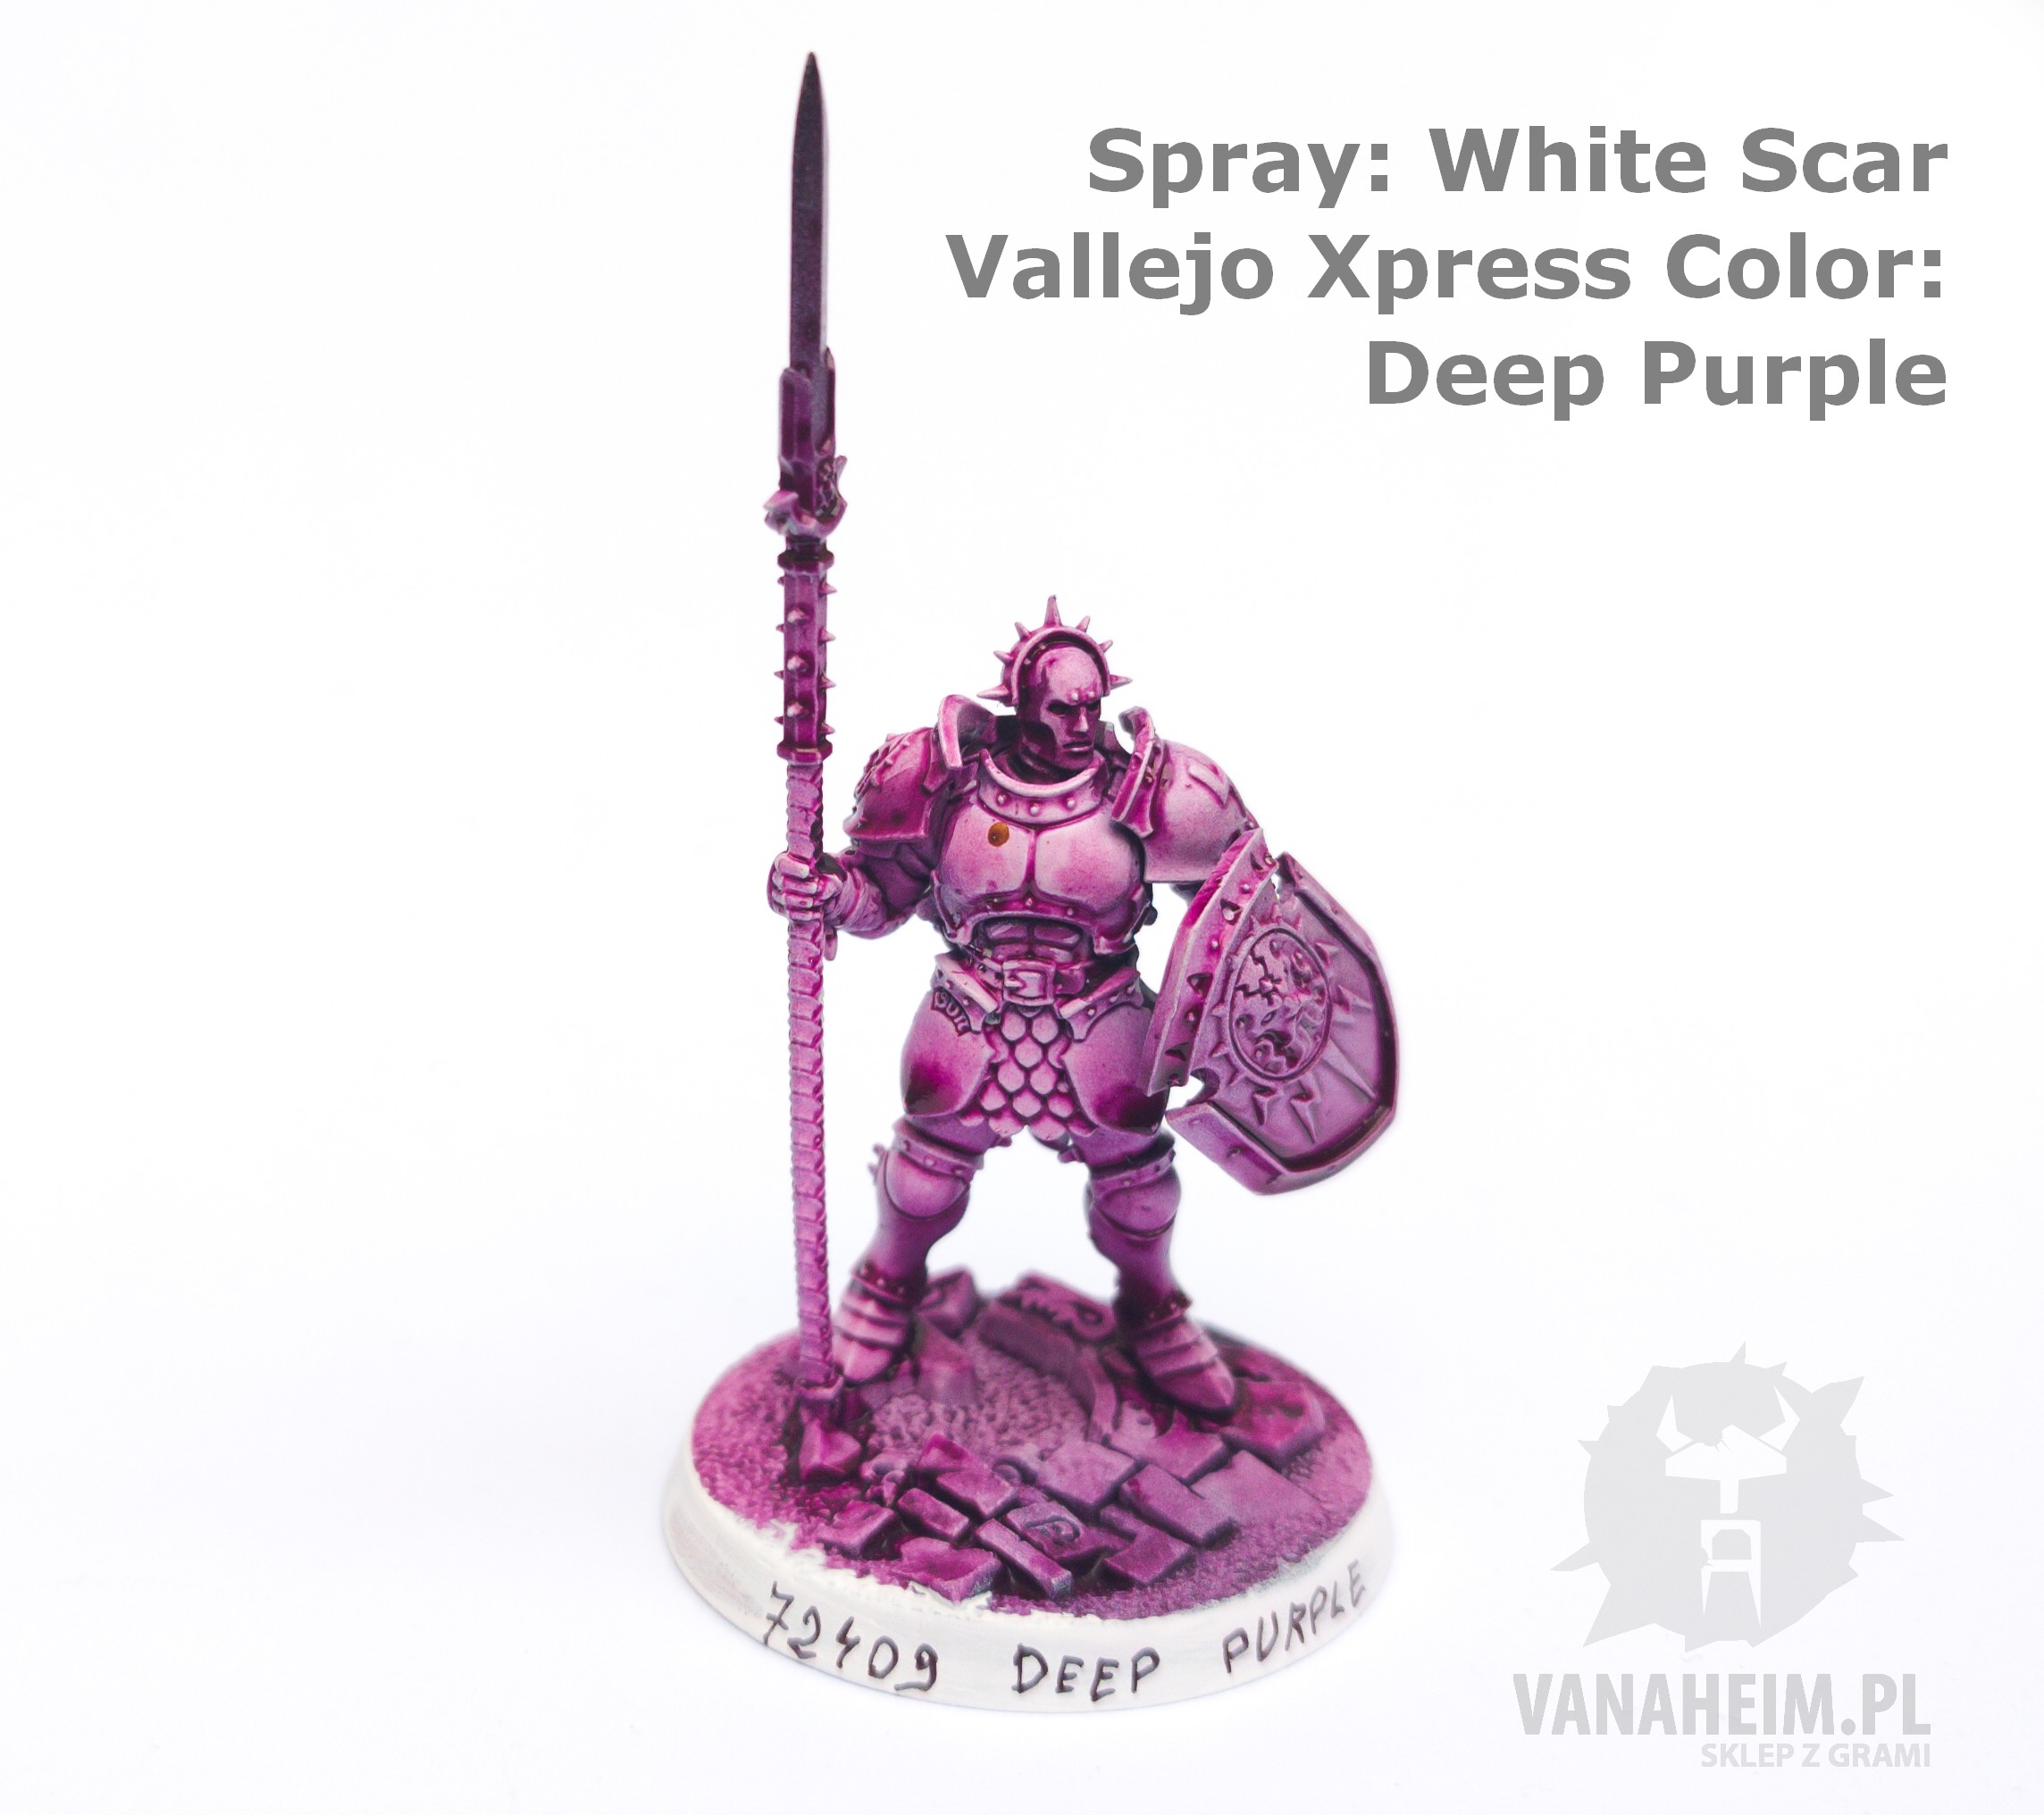 Vallejo Xpress Color Paint On White Spray Reference